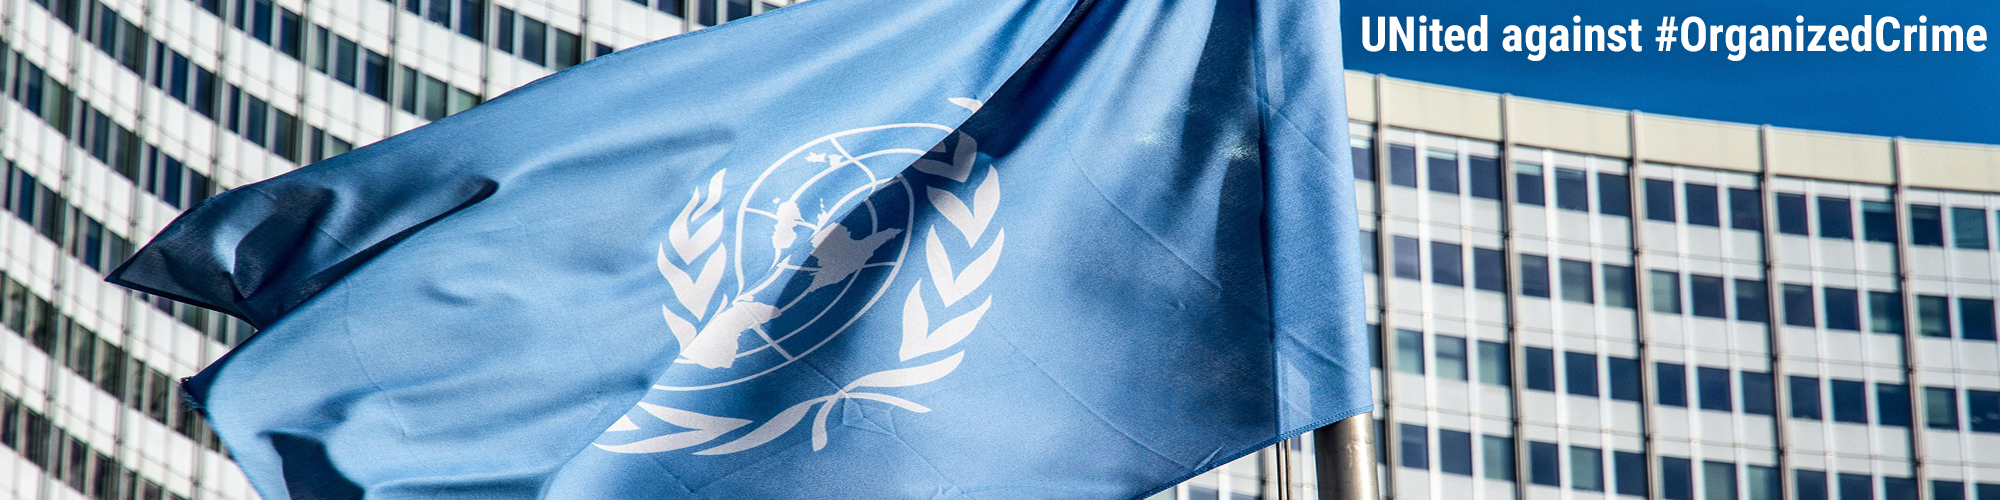 A visual with the flag of the United Nations. In the background the Vienna International Centre. The following text appears: UNited against #OrganizedCrime.